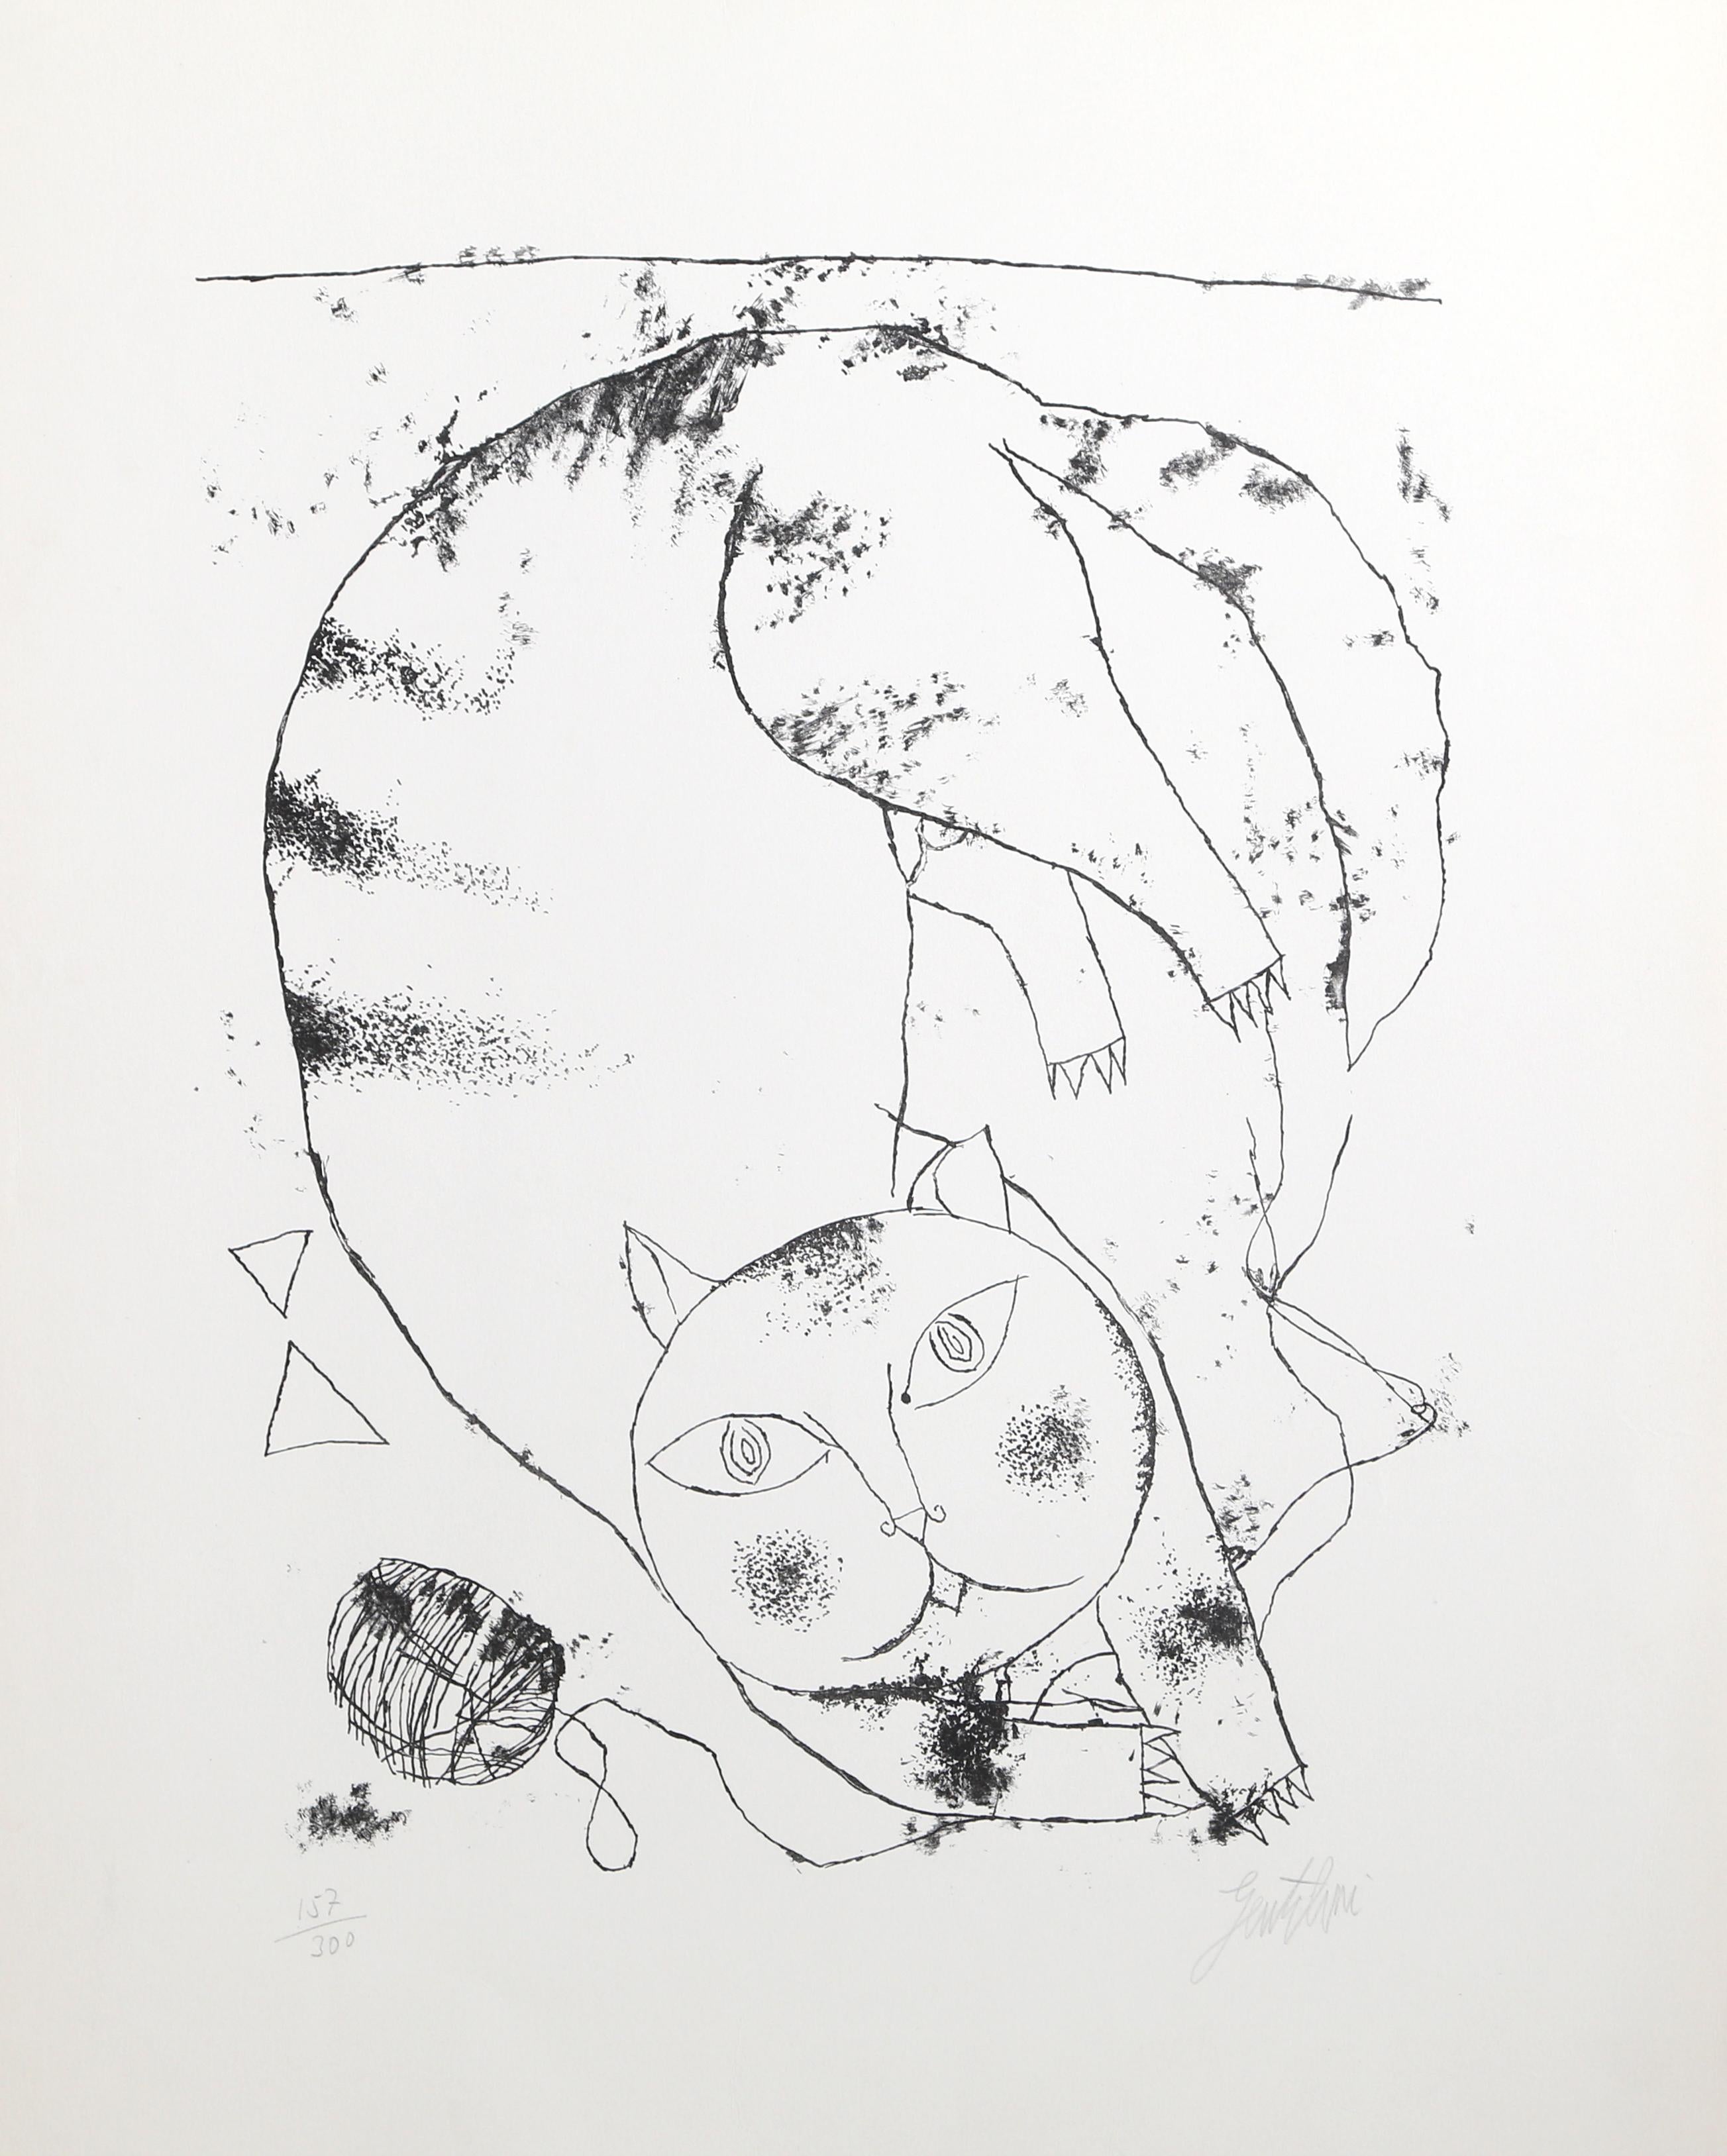 Artist: Franco Gentilini, Italian (1909 - 1981)
Title: Cat
Year: circa 1970
Medium: Lithograph, signed and numbered in pencil
Edition: 300
Image Size: 18 x 14 inches
Size: 28 x 20 in. (71.12 x 50.8 cm)